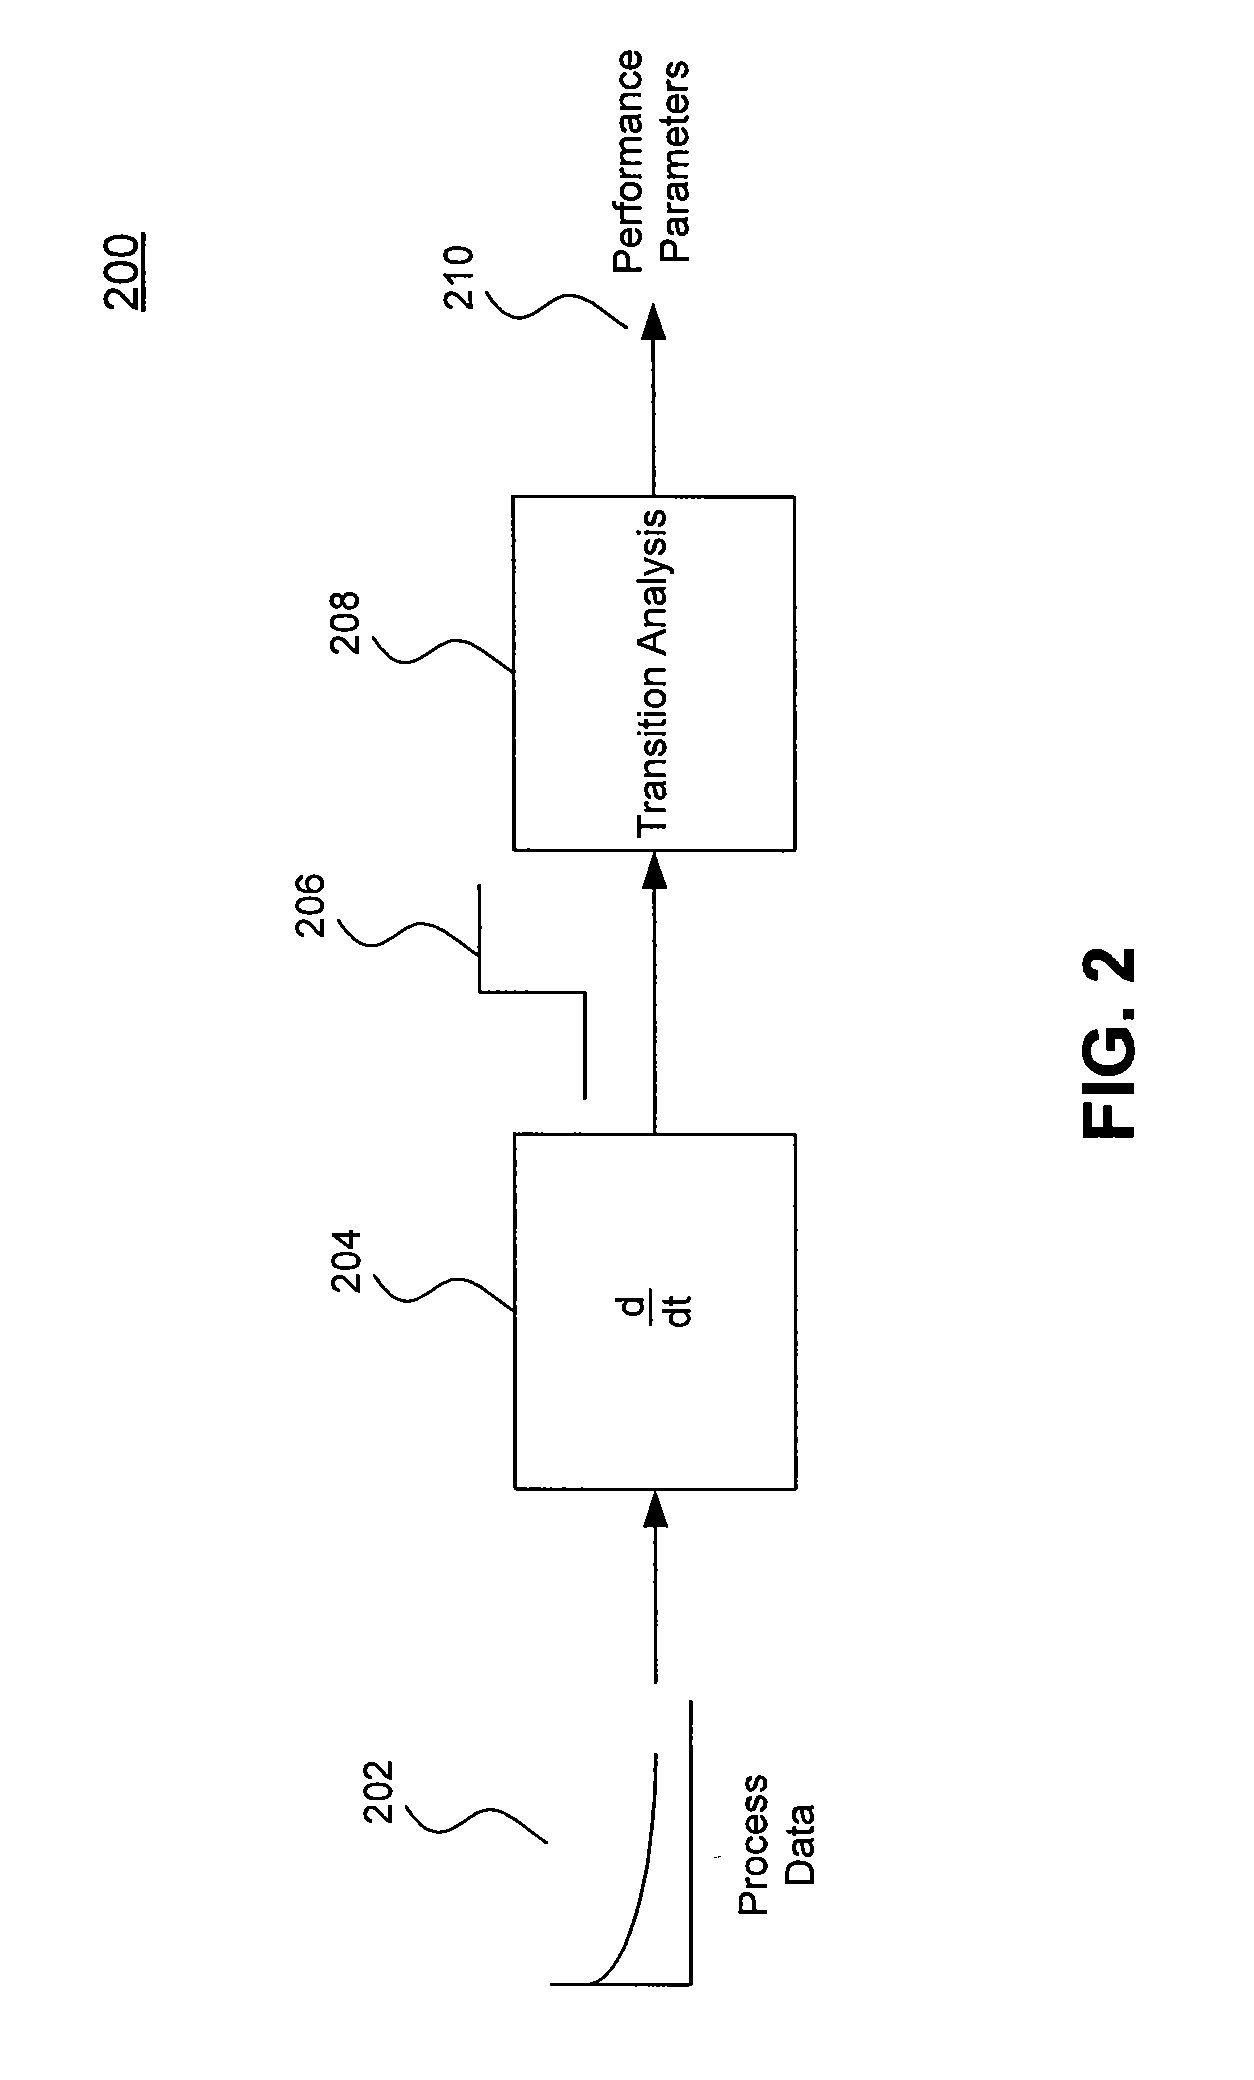 Systems and Methods for Evaluating Chromatography Column Performance